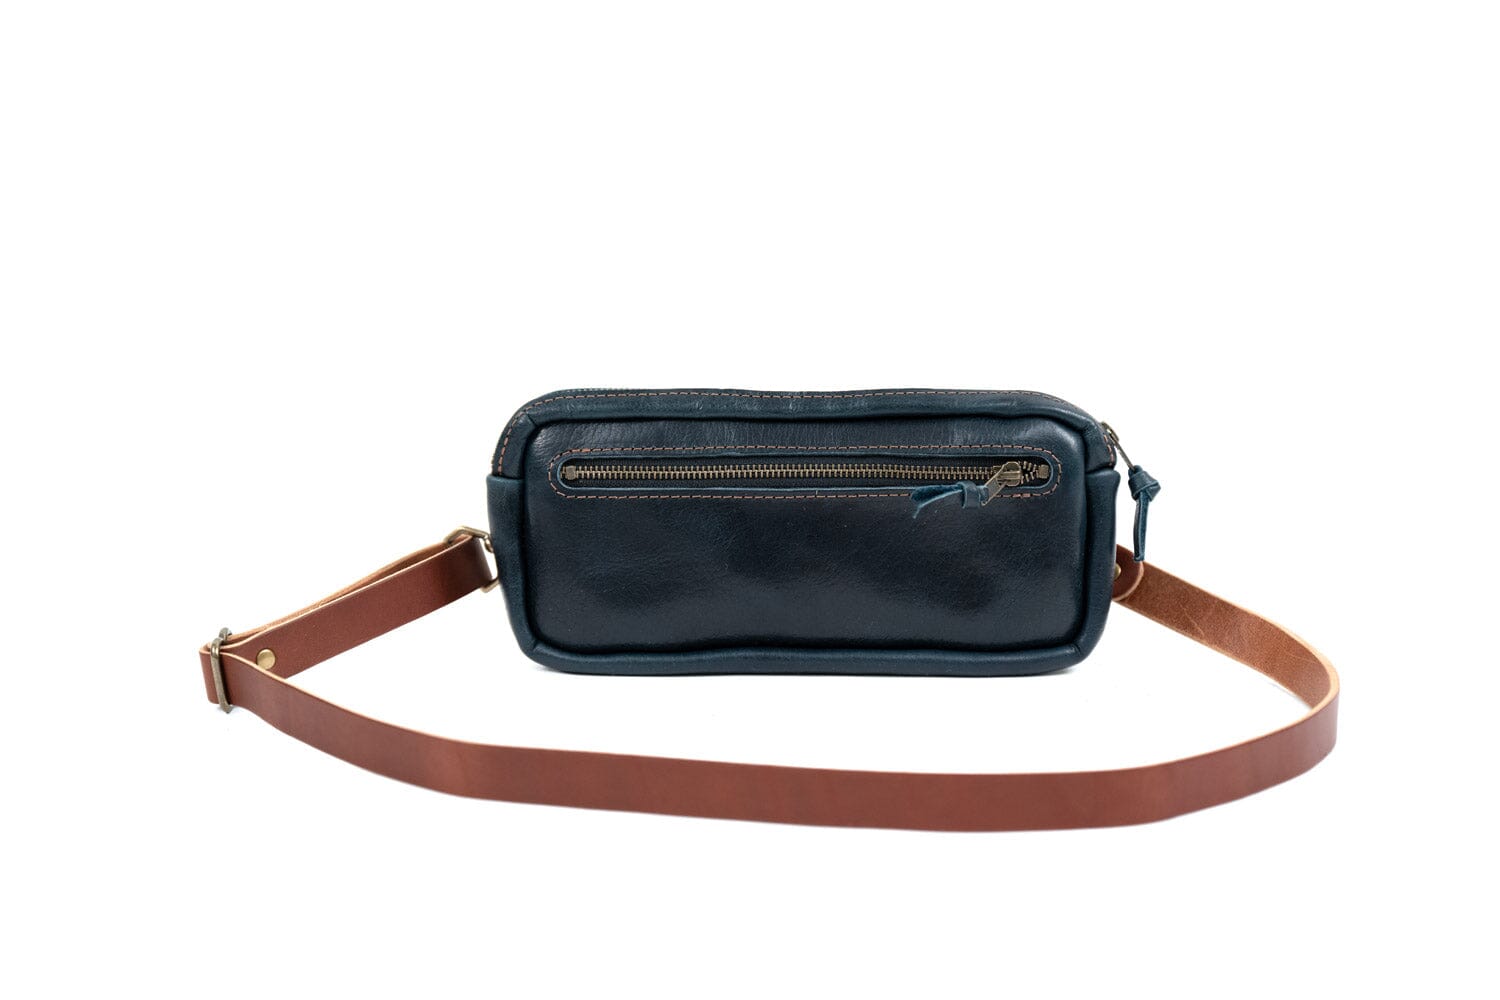 LEATHER FANNY PACK / LEATHER WAIST BAG - DELUXE - INDIGO BISON